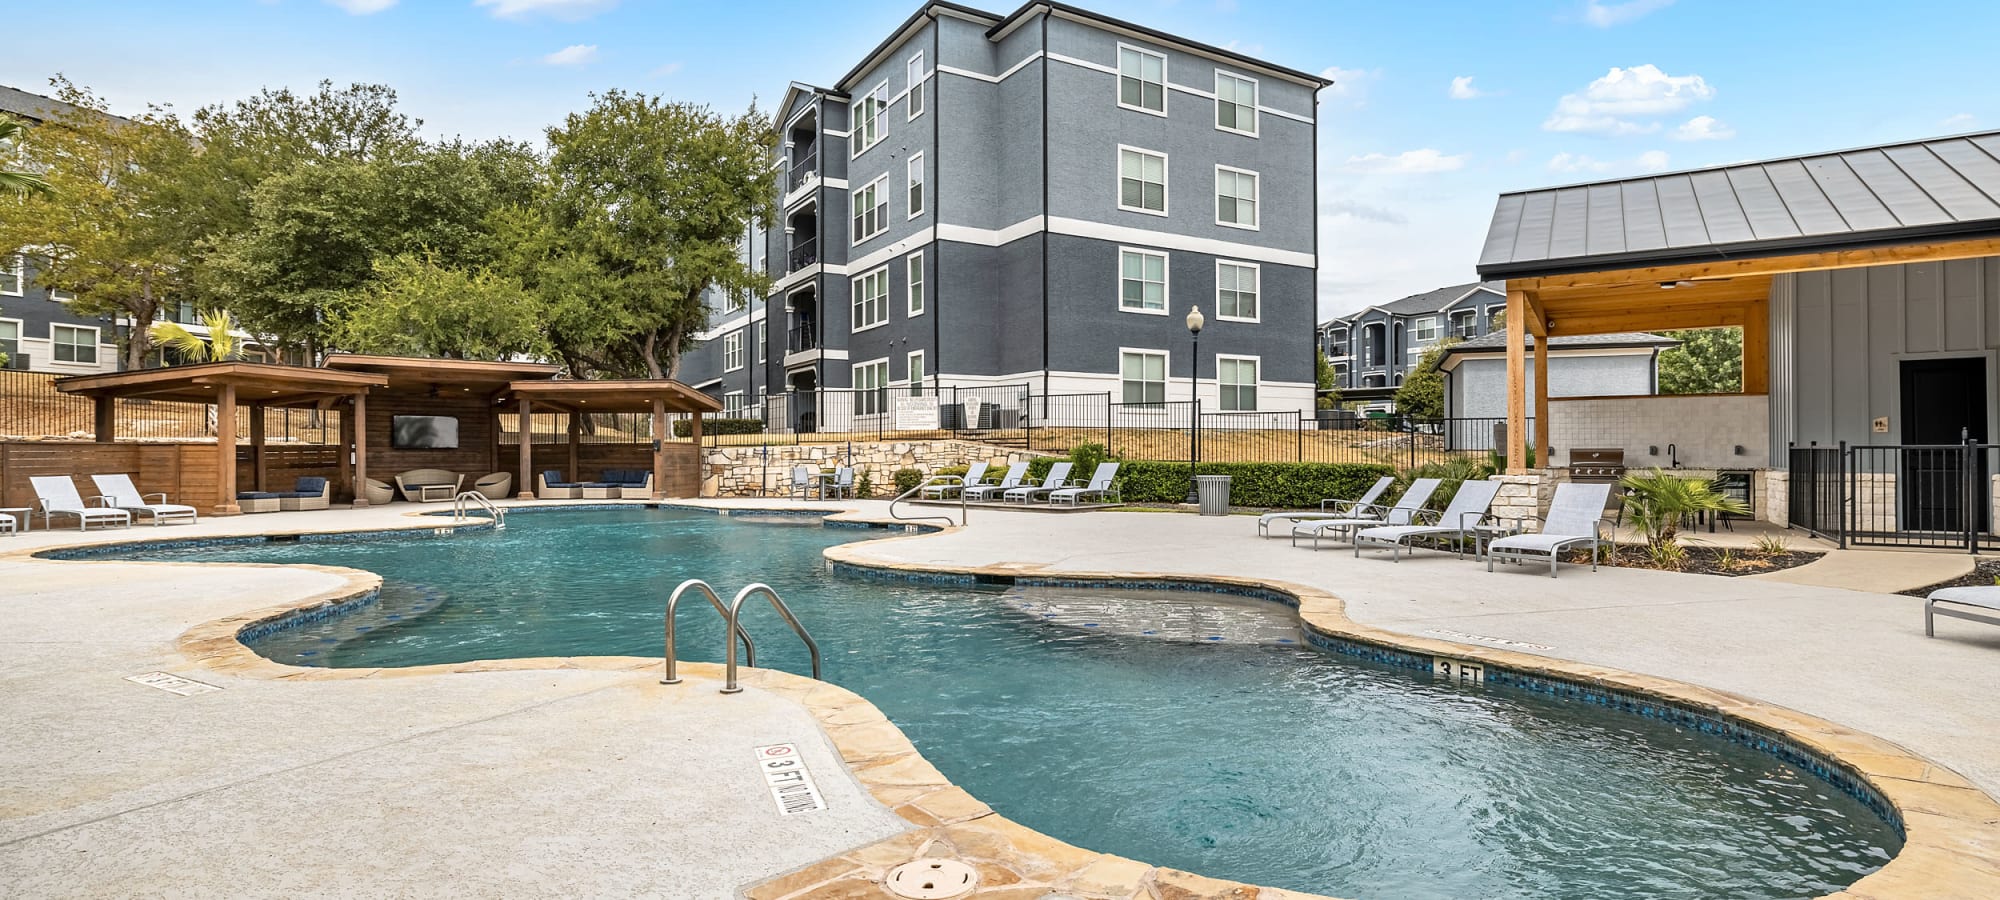 Apply to live at Marquis at Crown Ridge in San Antonio, Texas